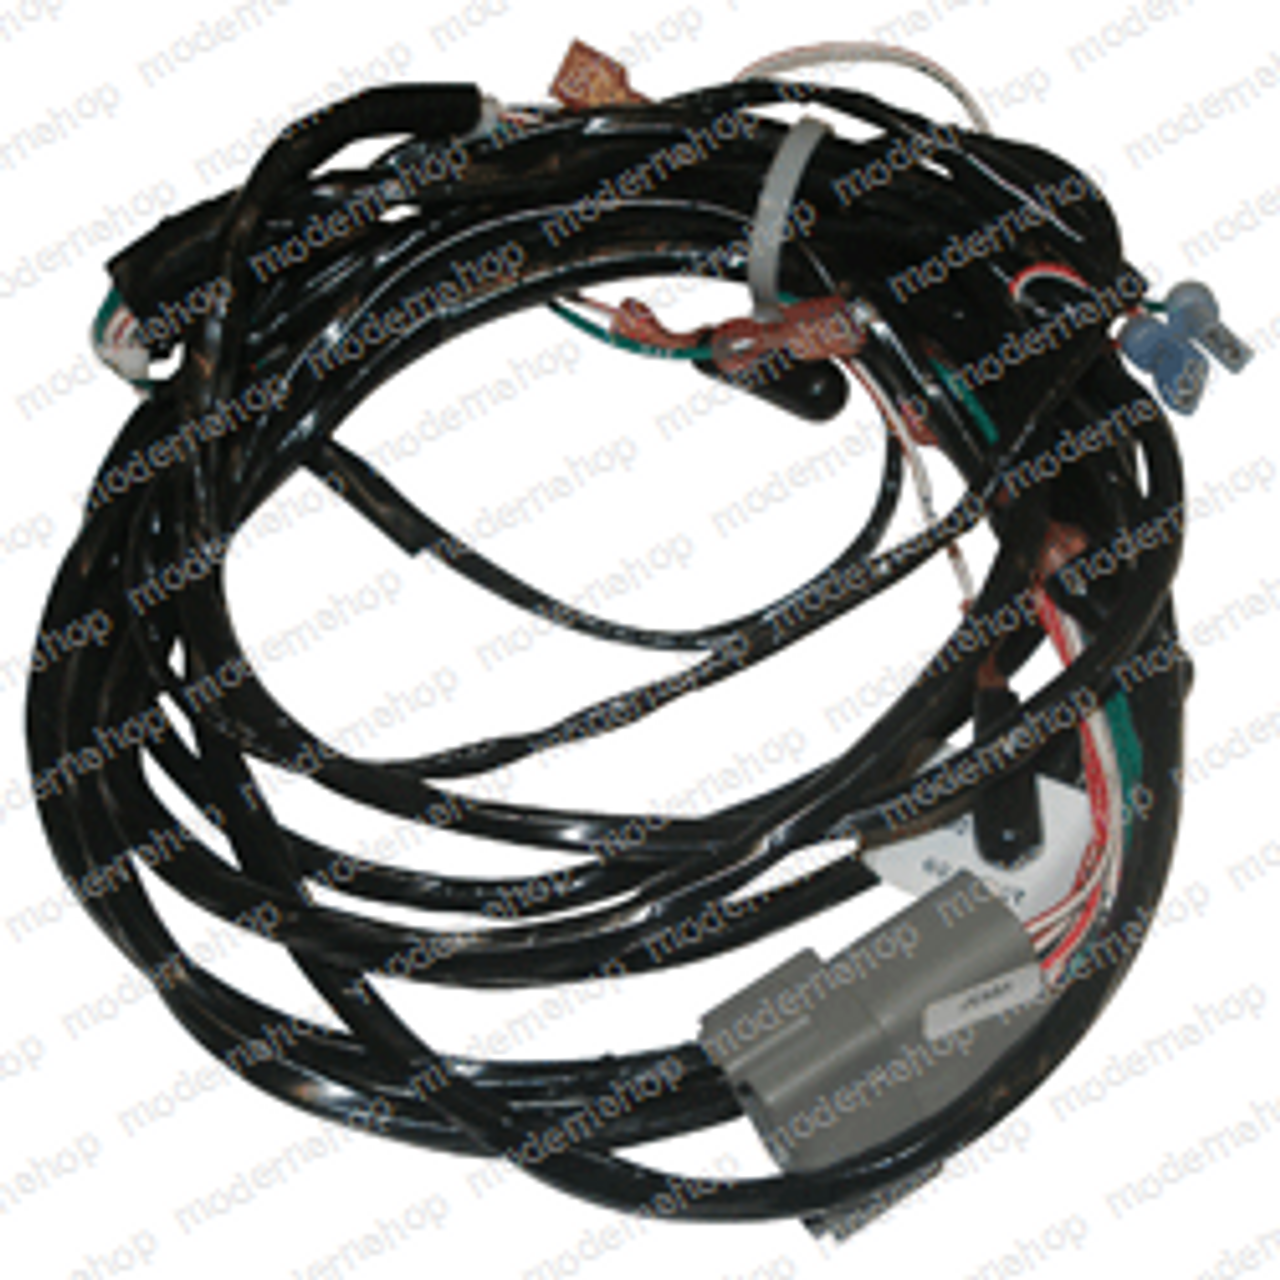 124546: Crown Forklift HARNESS SC3000 OVERHEAD GUARD